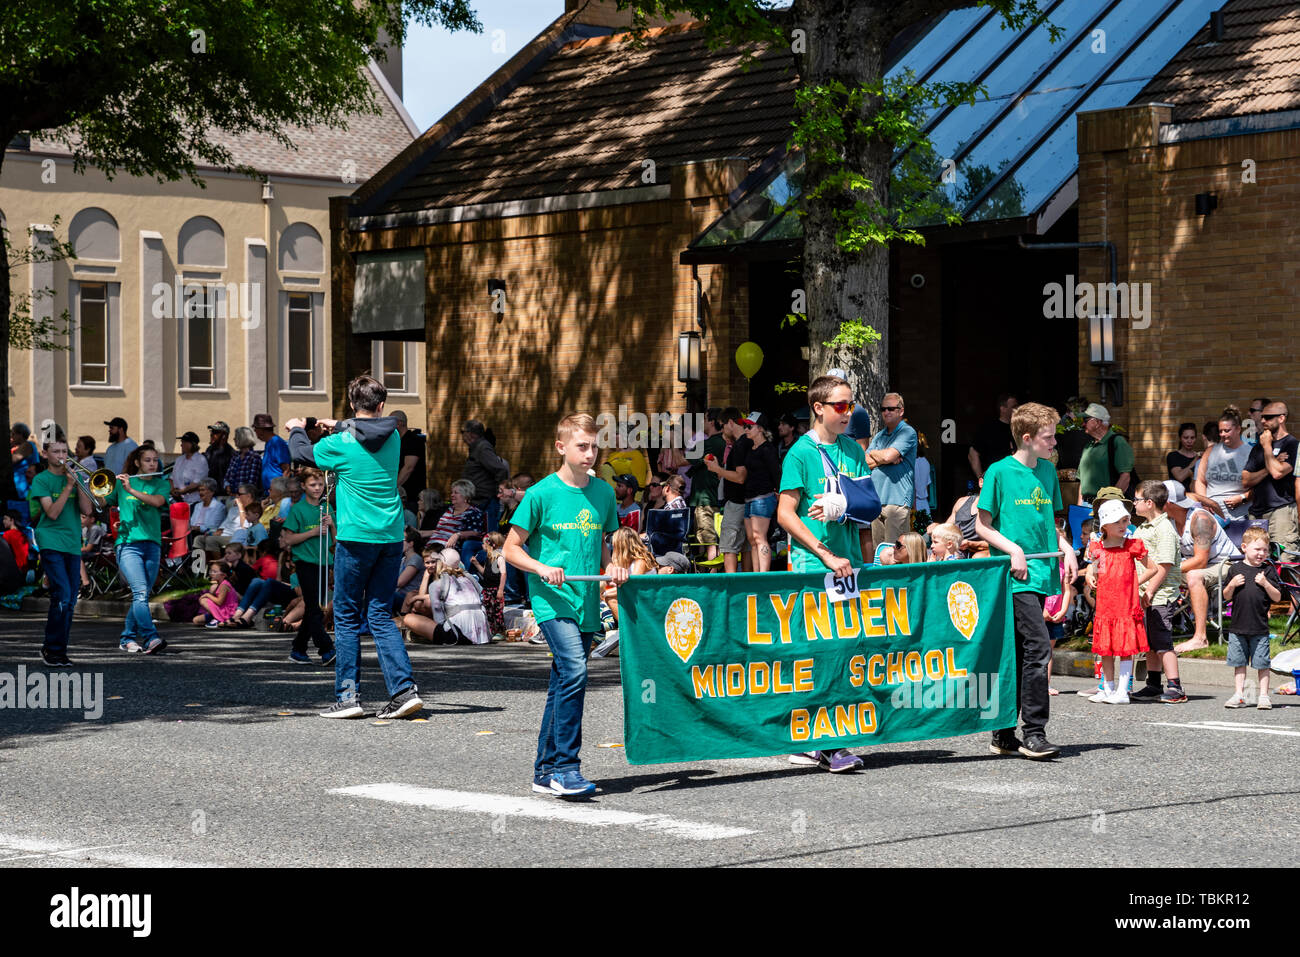 Lynden Middle School Band marches in the 2019 Lynden Farmers Day Parade.  Lynden, Washington Stock Photo